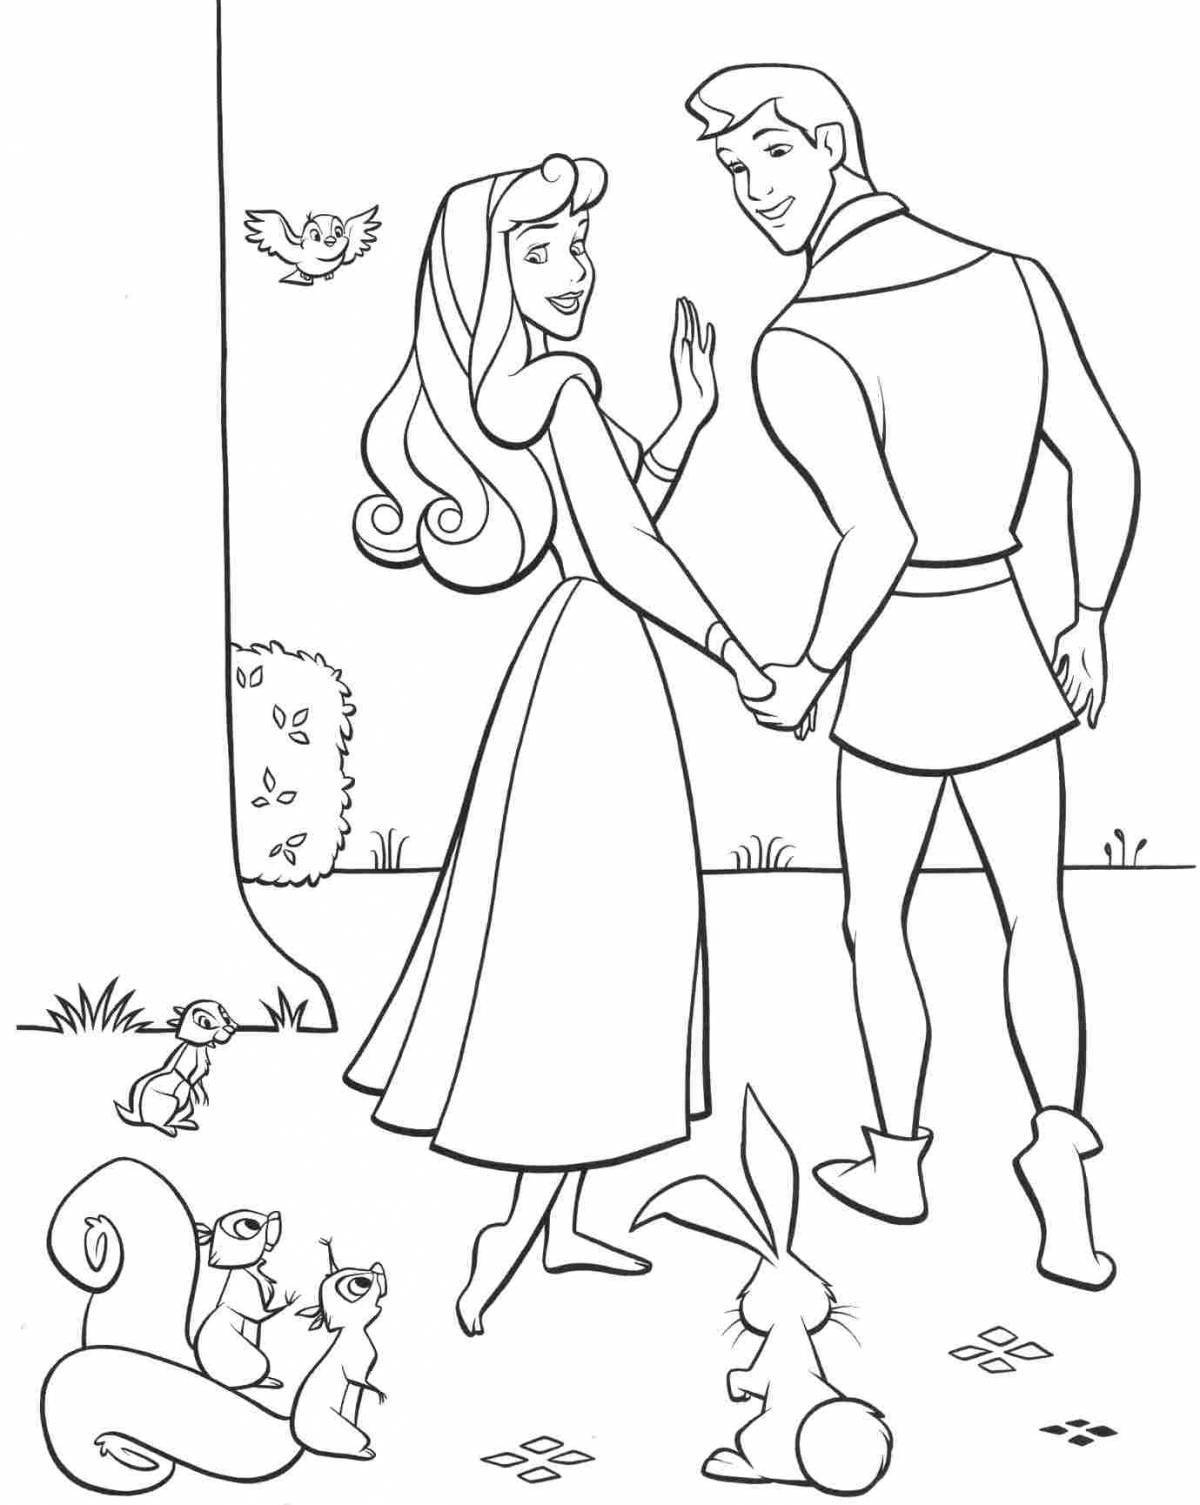 Coloring book luxury prince and princess